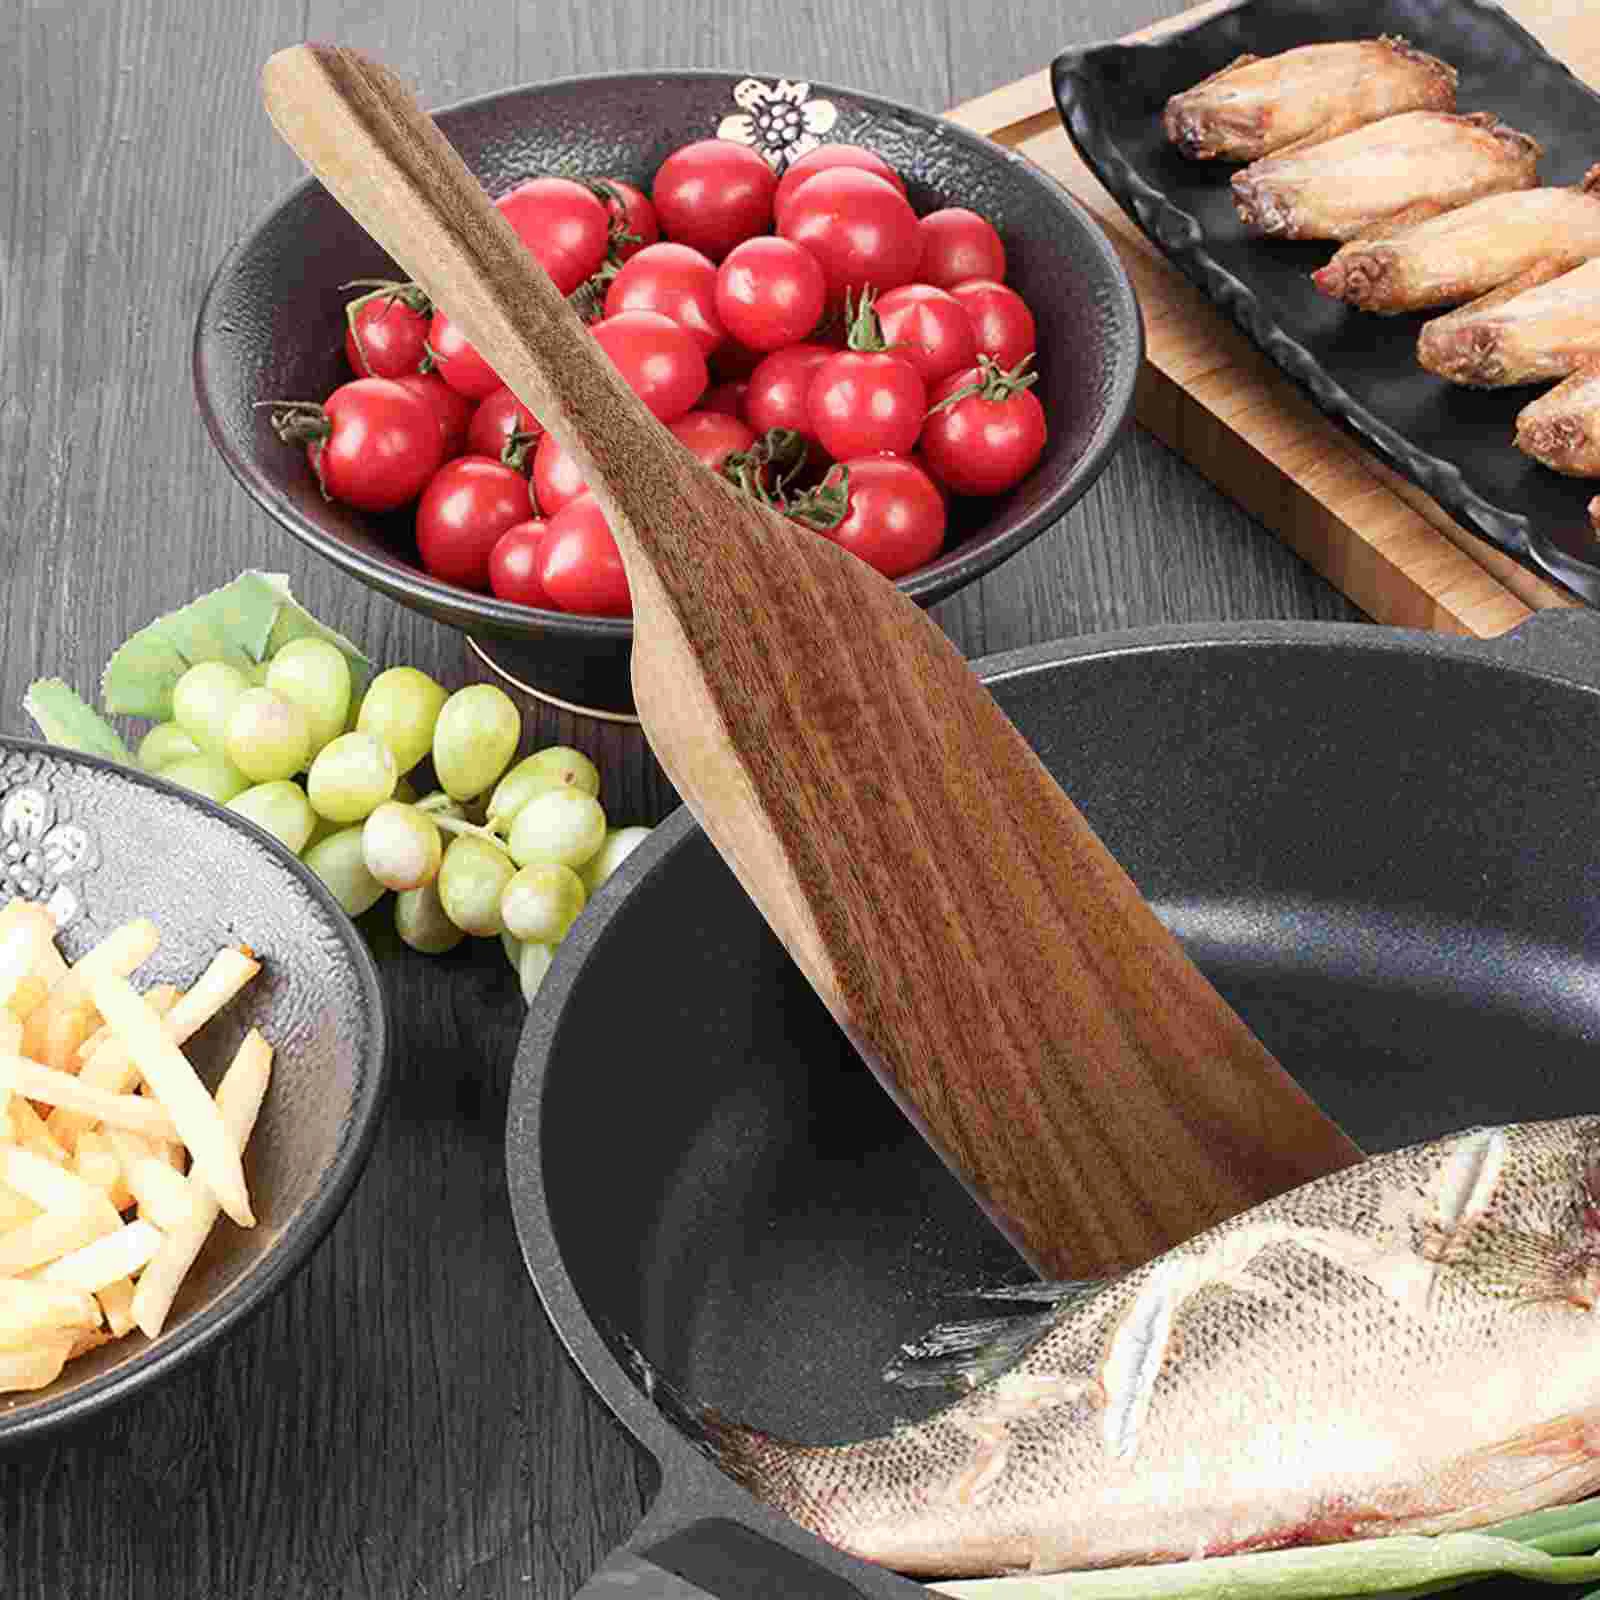 

Spatula Wooden Cooking Kitchen Spurtles Wood Turner Utensils Bamboo Non Stick Mixing Wok Slotted Utensil Nonstick Natural Steak